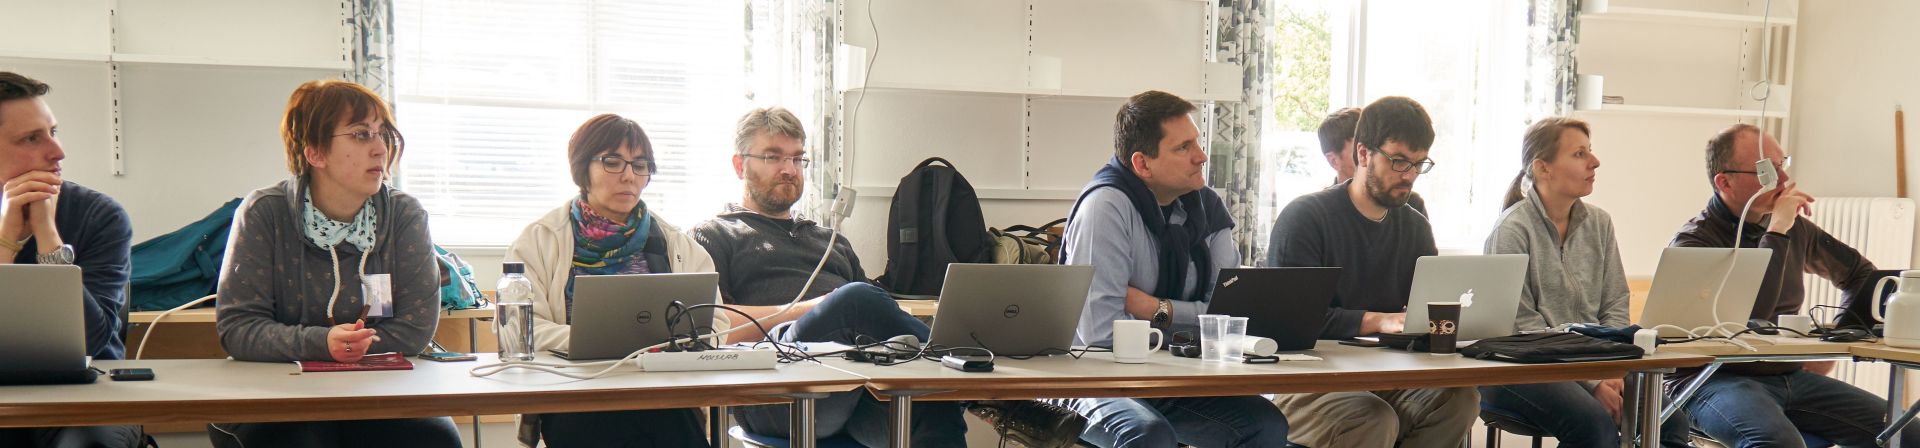 Photo showing workshop participants sitting in a row while listening to a talk on visual analytics and computer graphics in a meeting room.